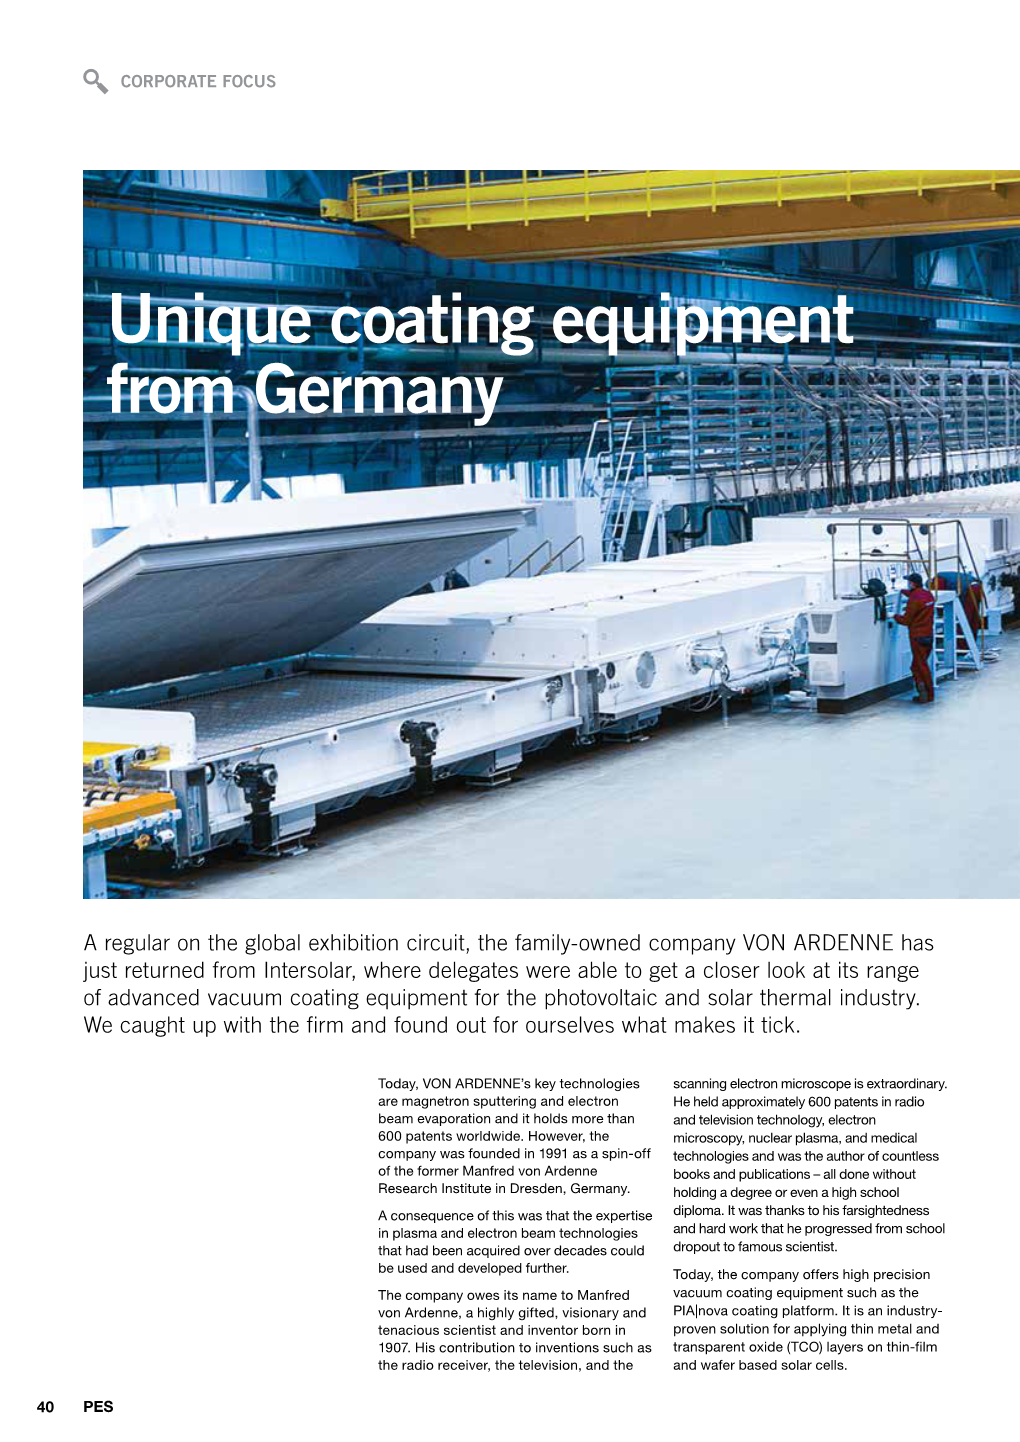 Unique Coating Equipment from Germany